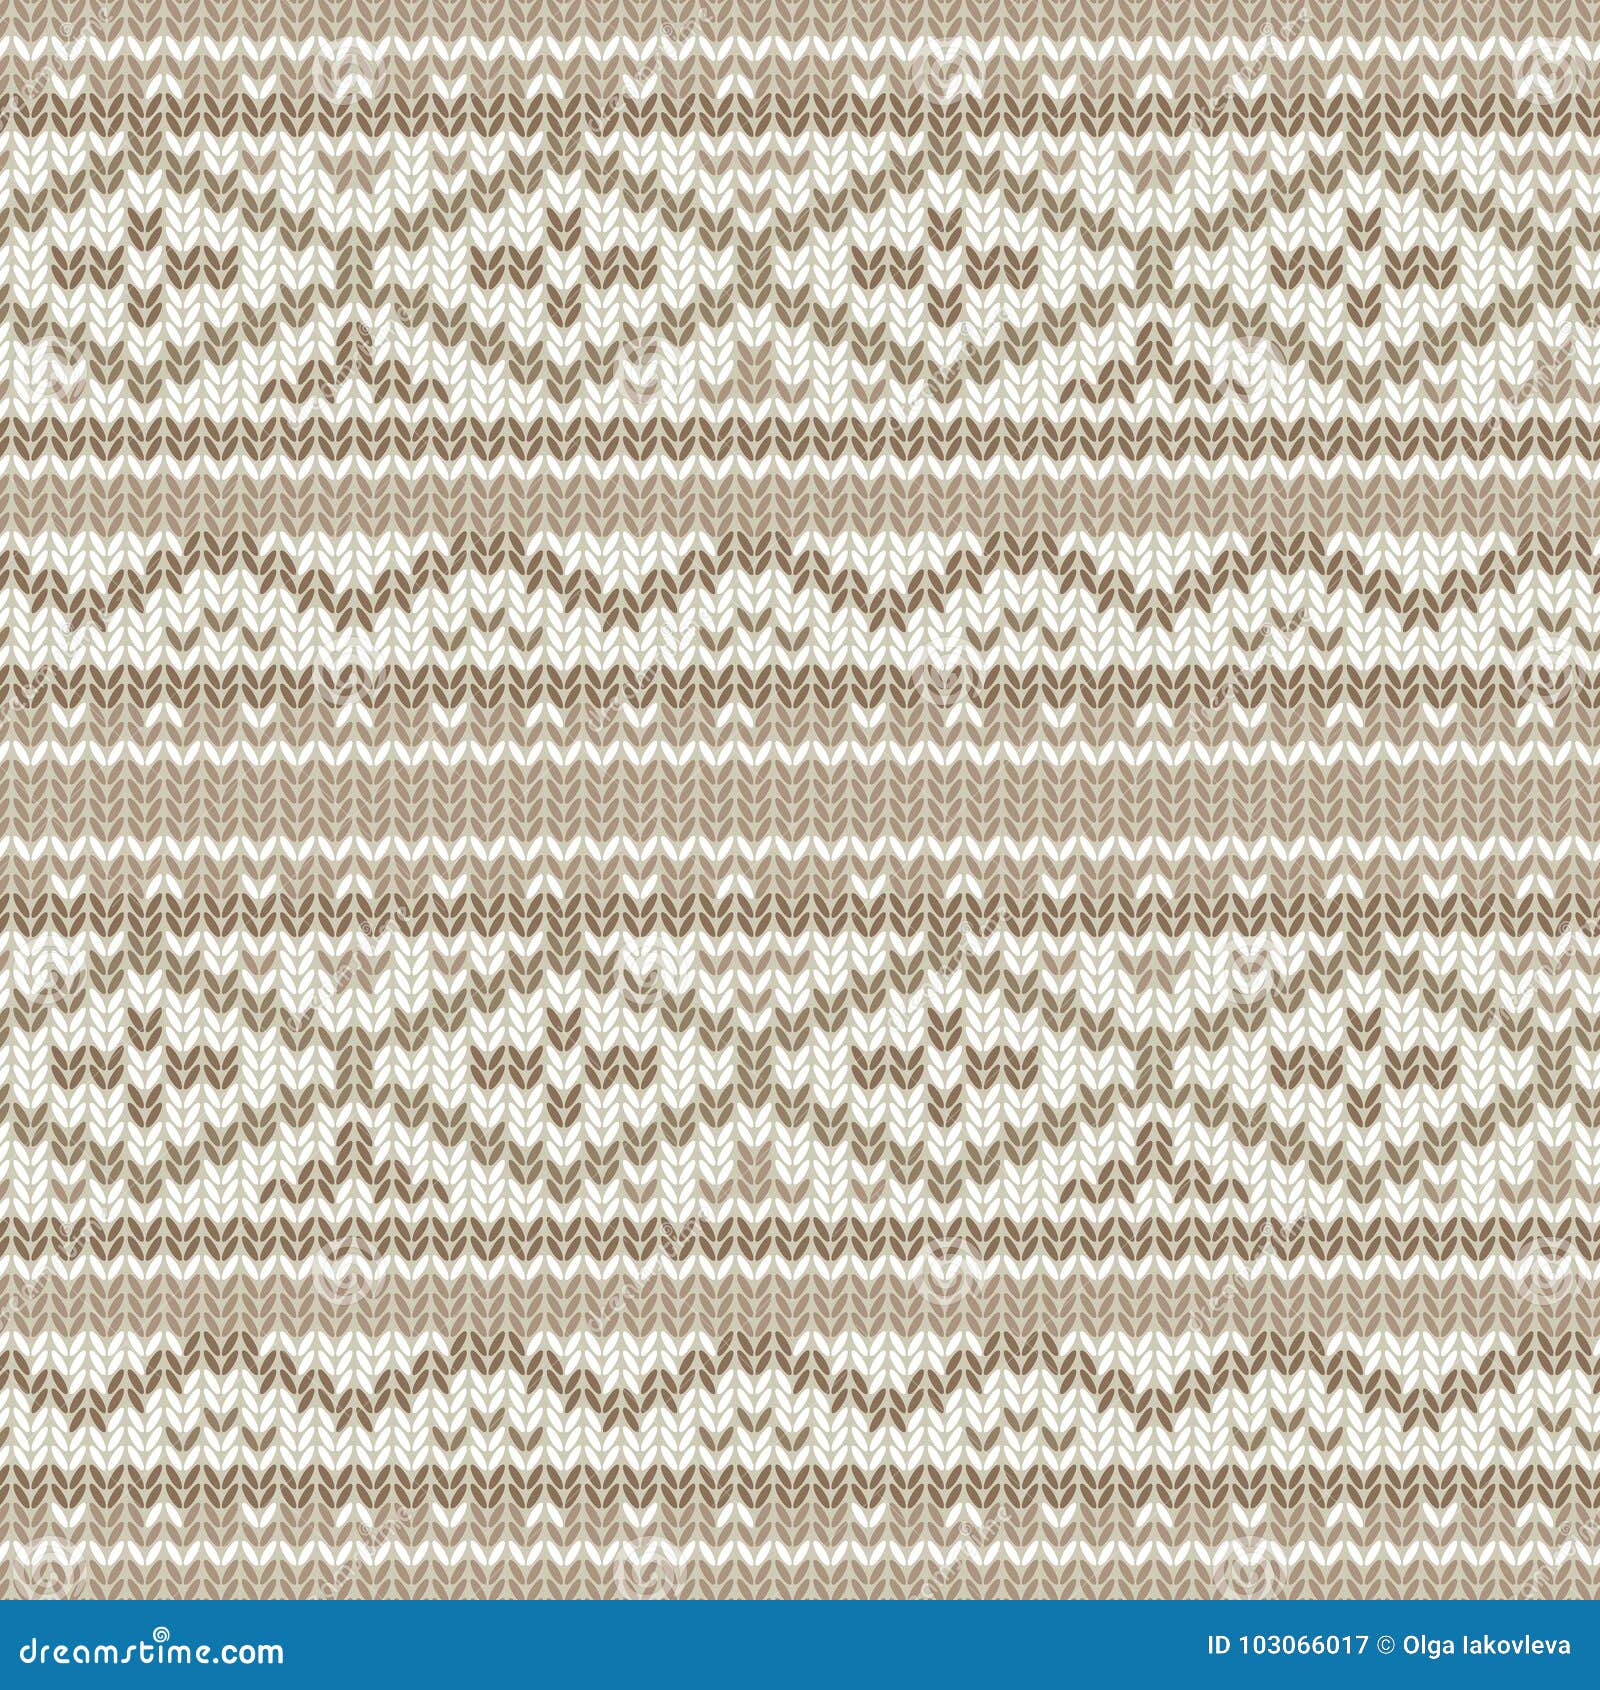 Knitted Seamless Vector Pattern With Cozy Geometric Ornament